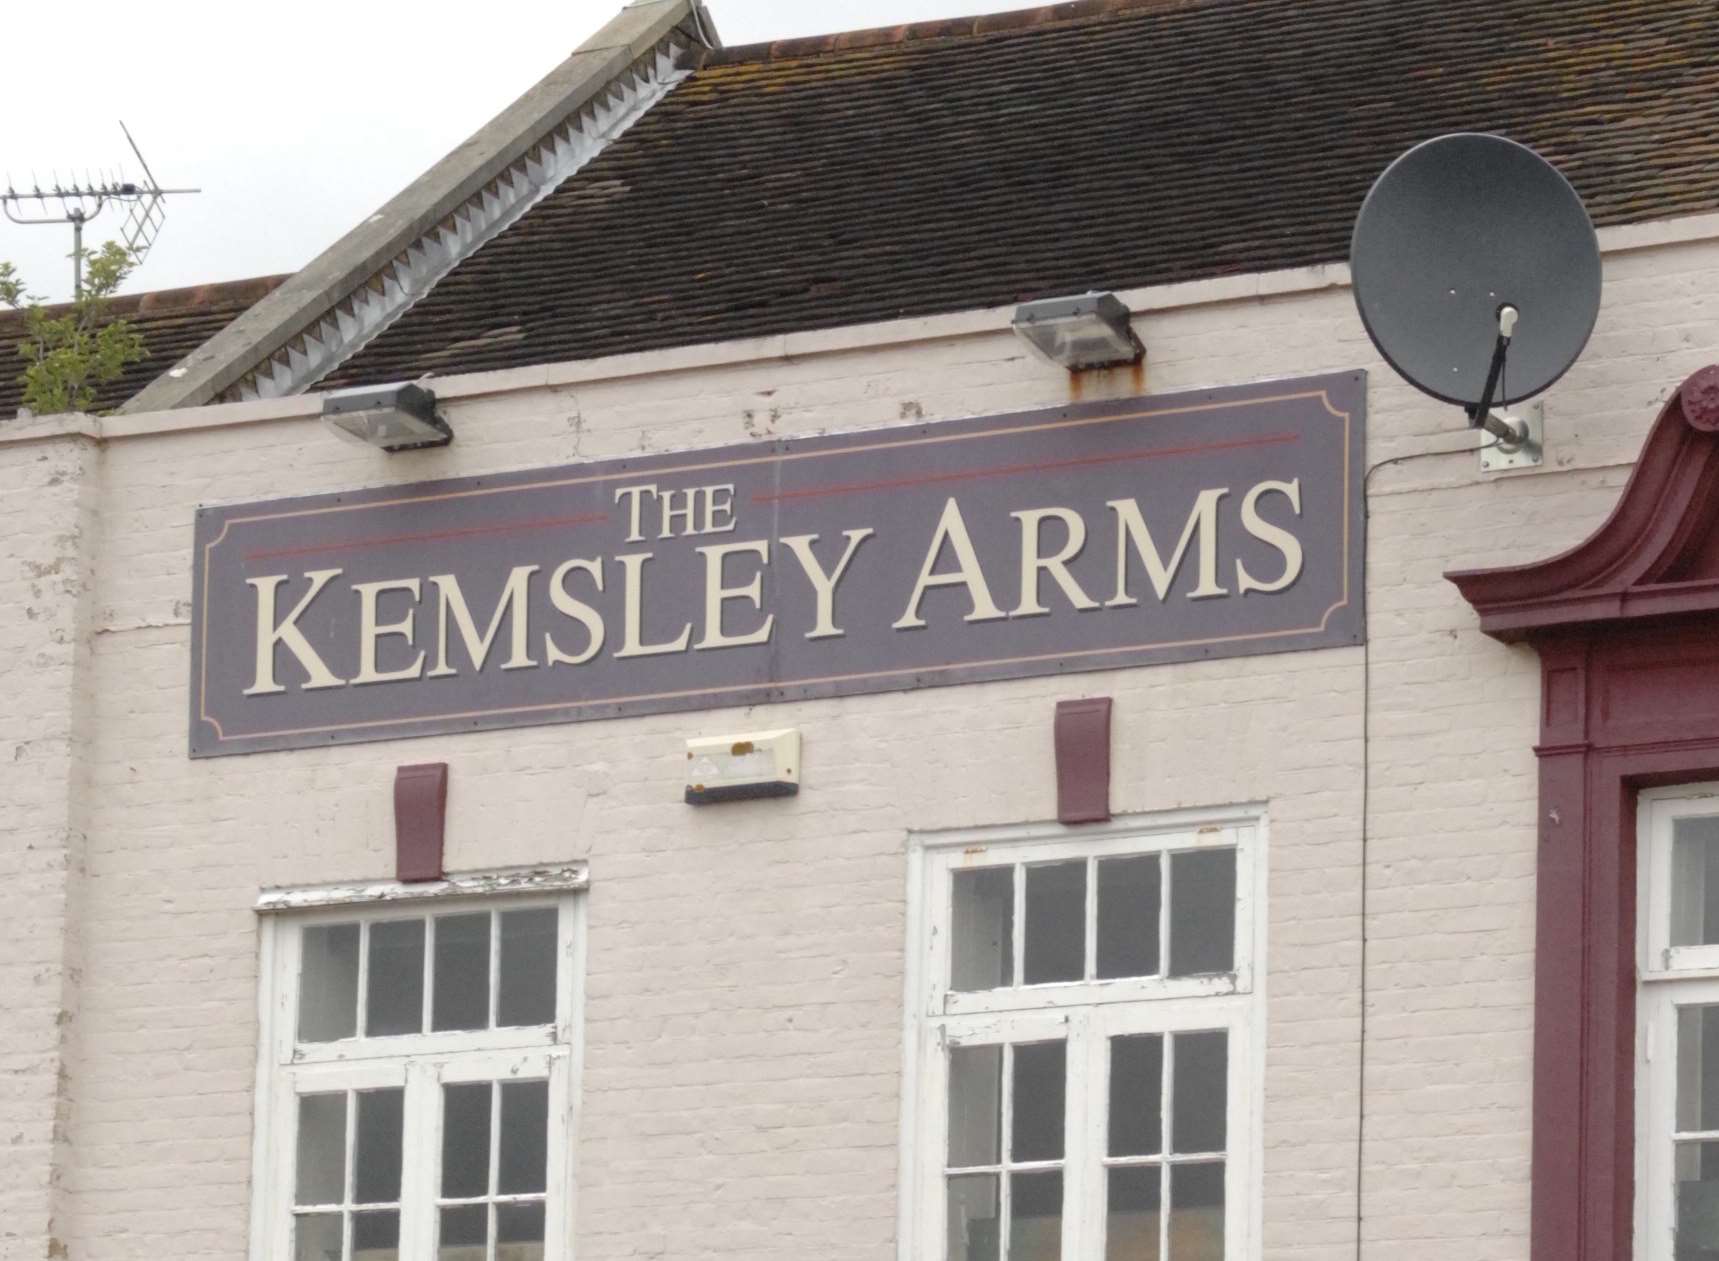 The Kemsley Arms in Kemsley, Sittingbourne. Picture: Chris Davey